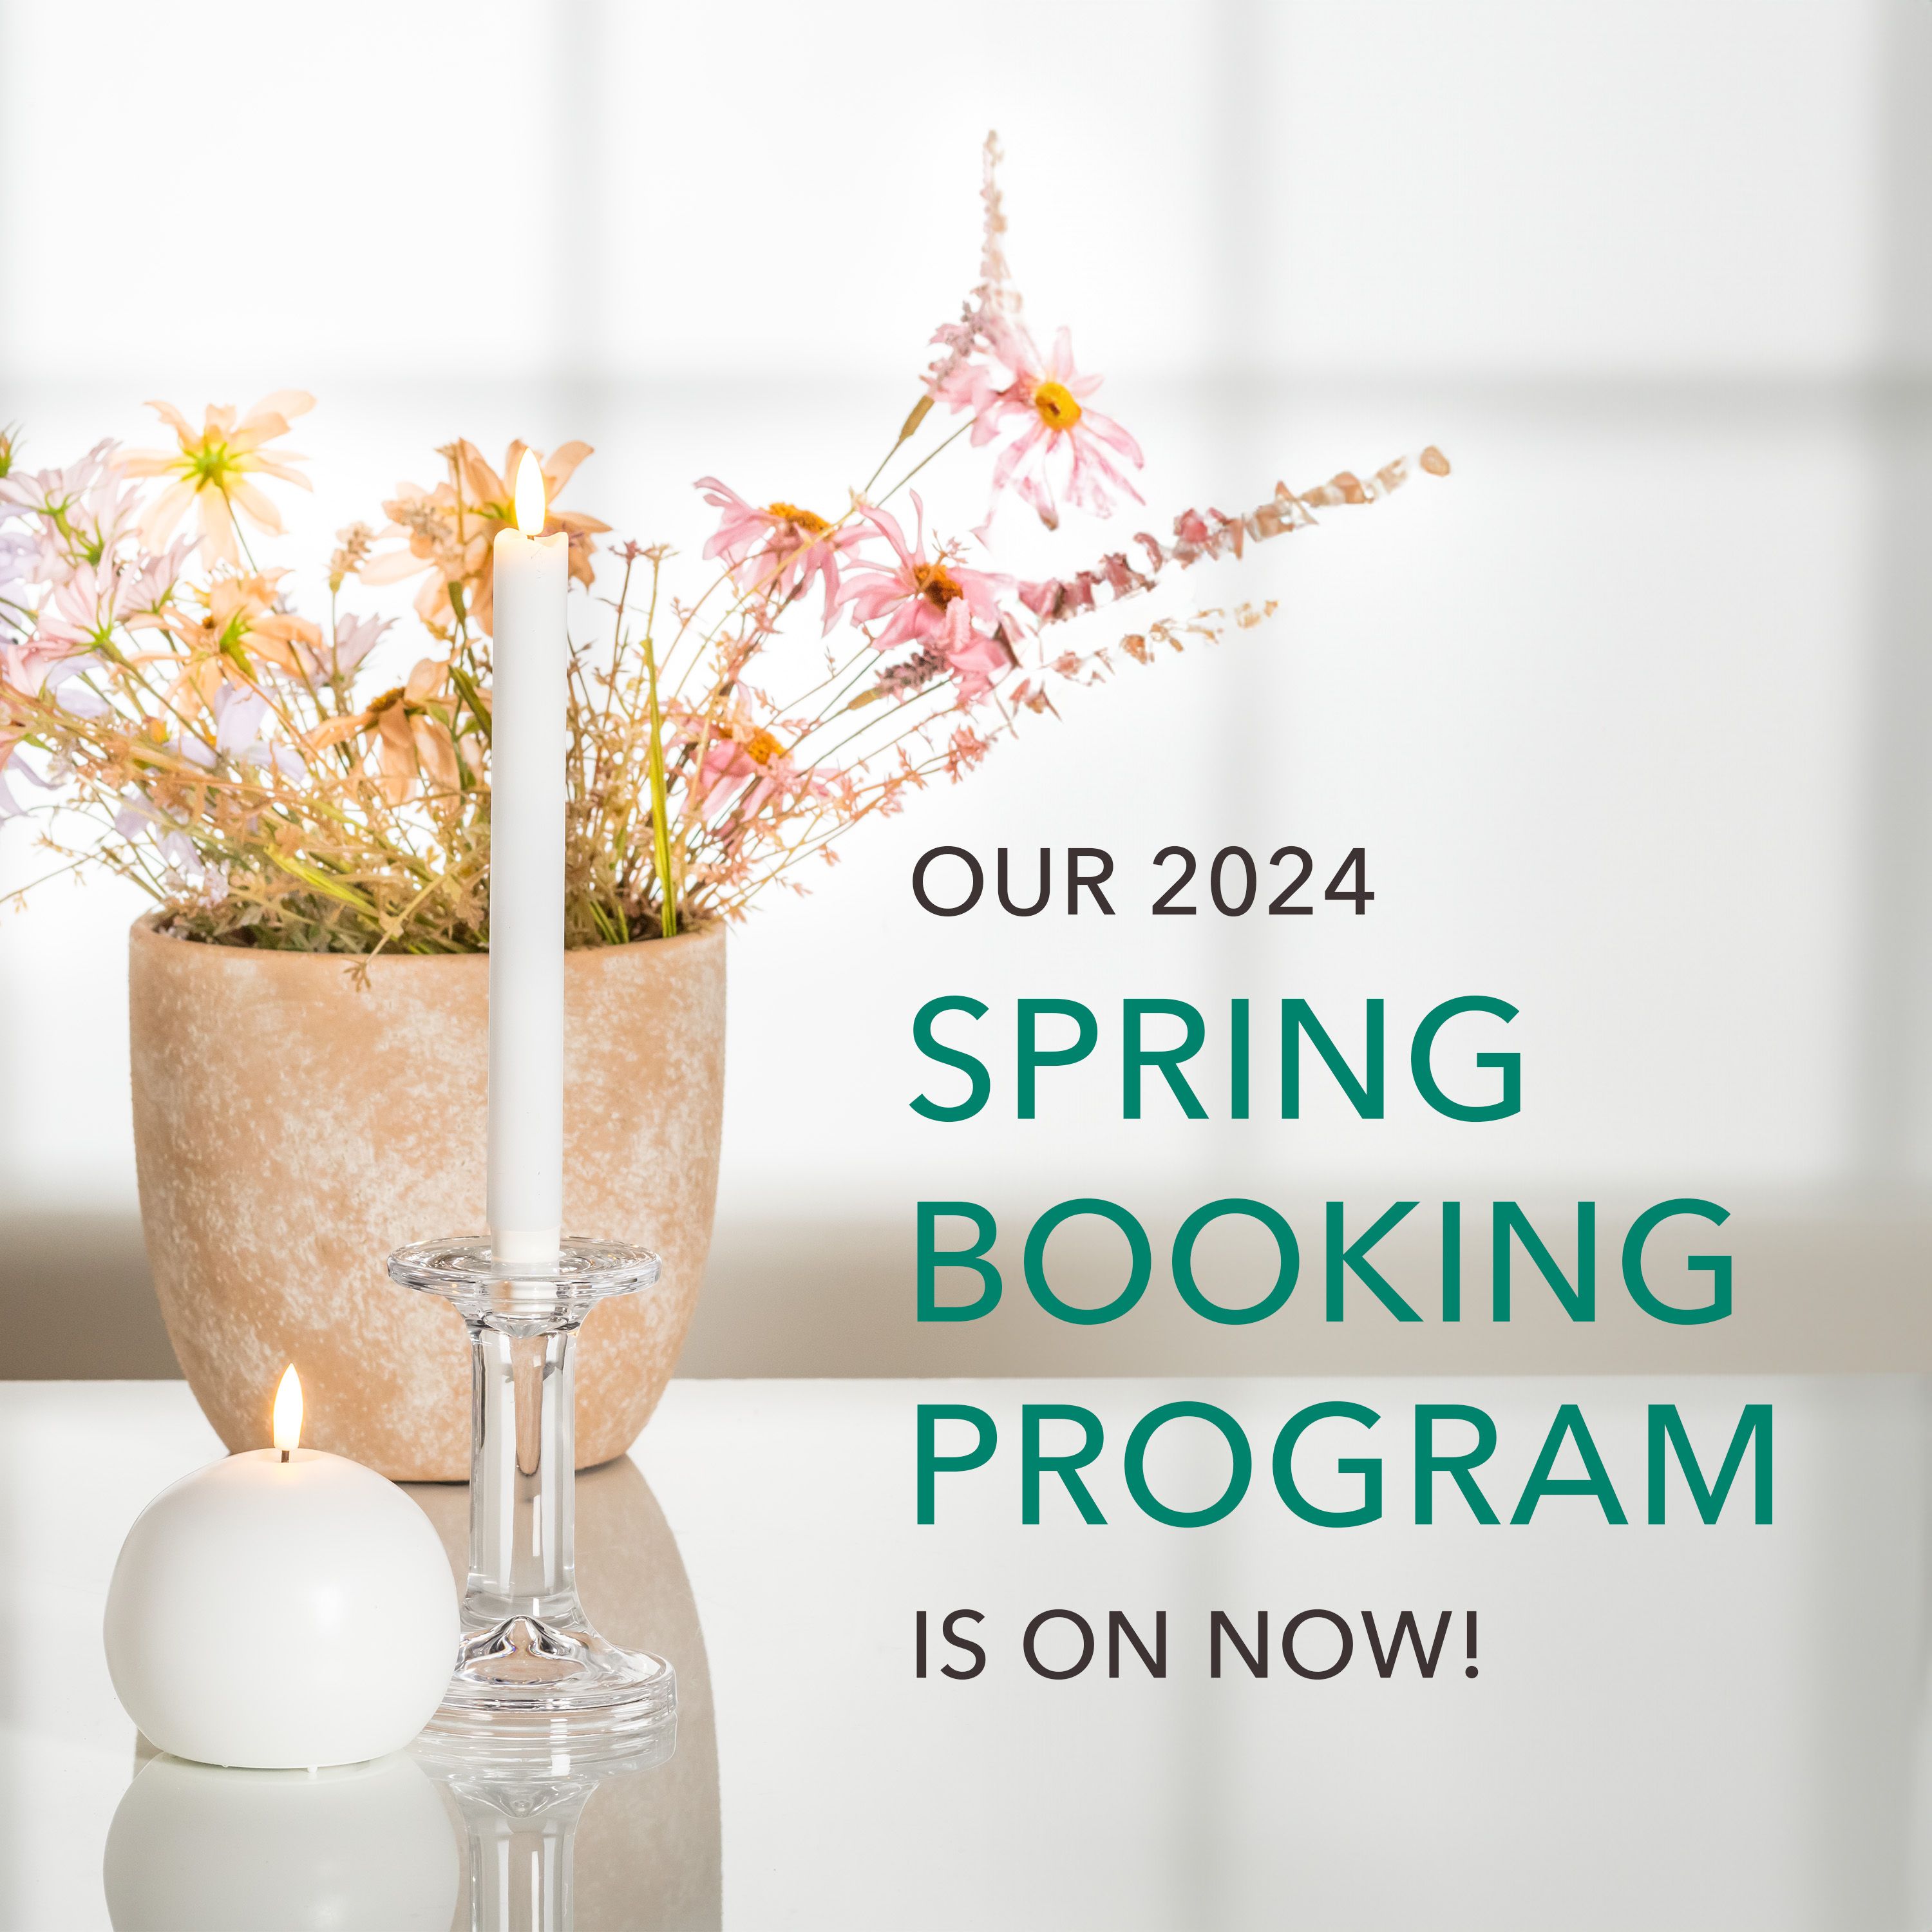 Our 2024 Spring Booking Program is in full swing! Get discounts, extended payment terms and freight incentives when you book your 2024 Spring order now. ⁠ 🌼☀🐰⁠